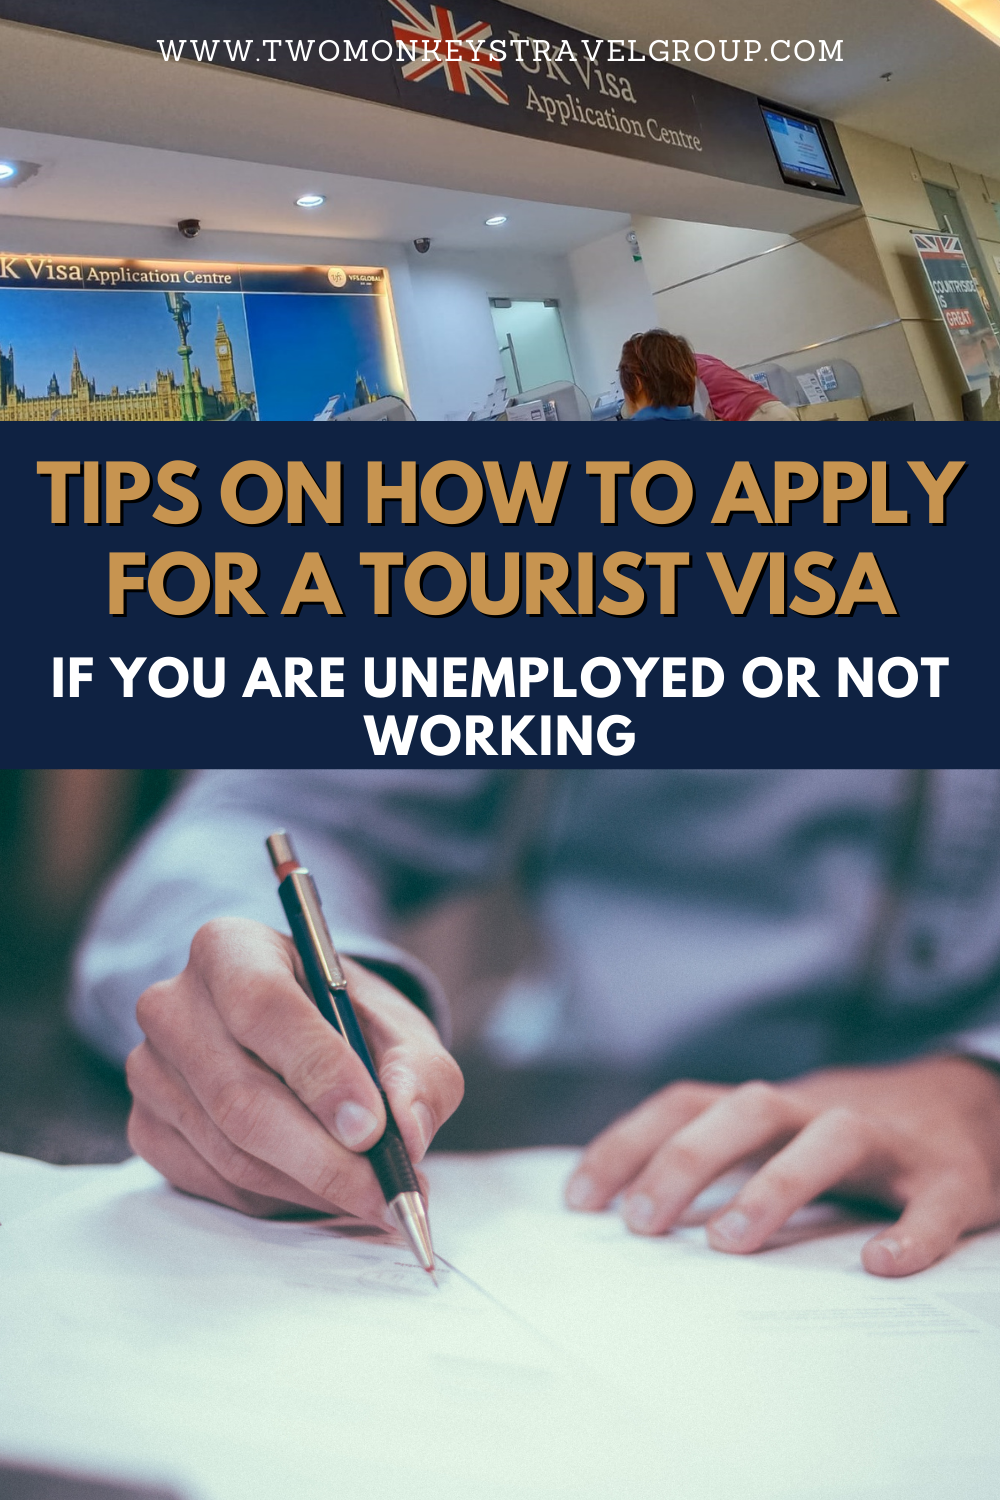 Tips How to Apply for a Tourist Visa if You Are Unemployed or Not Working